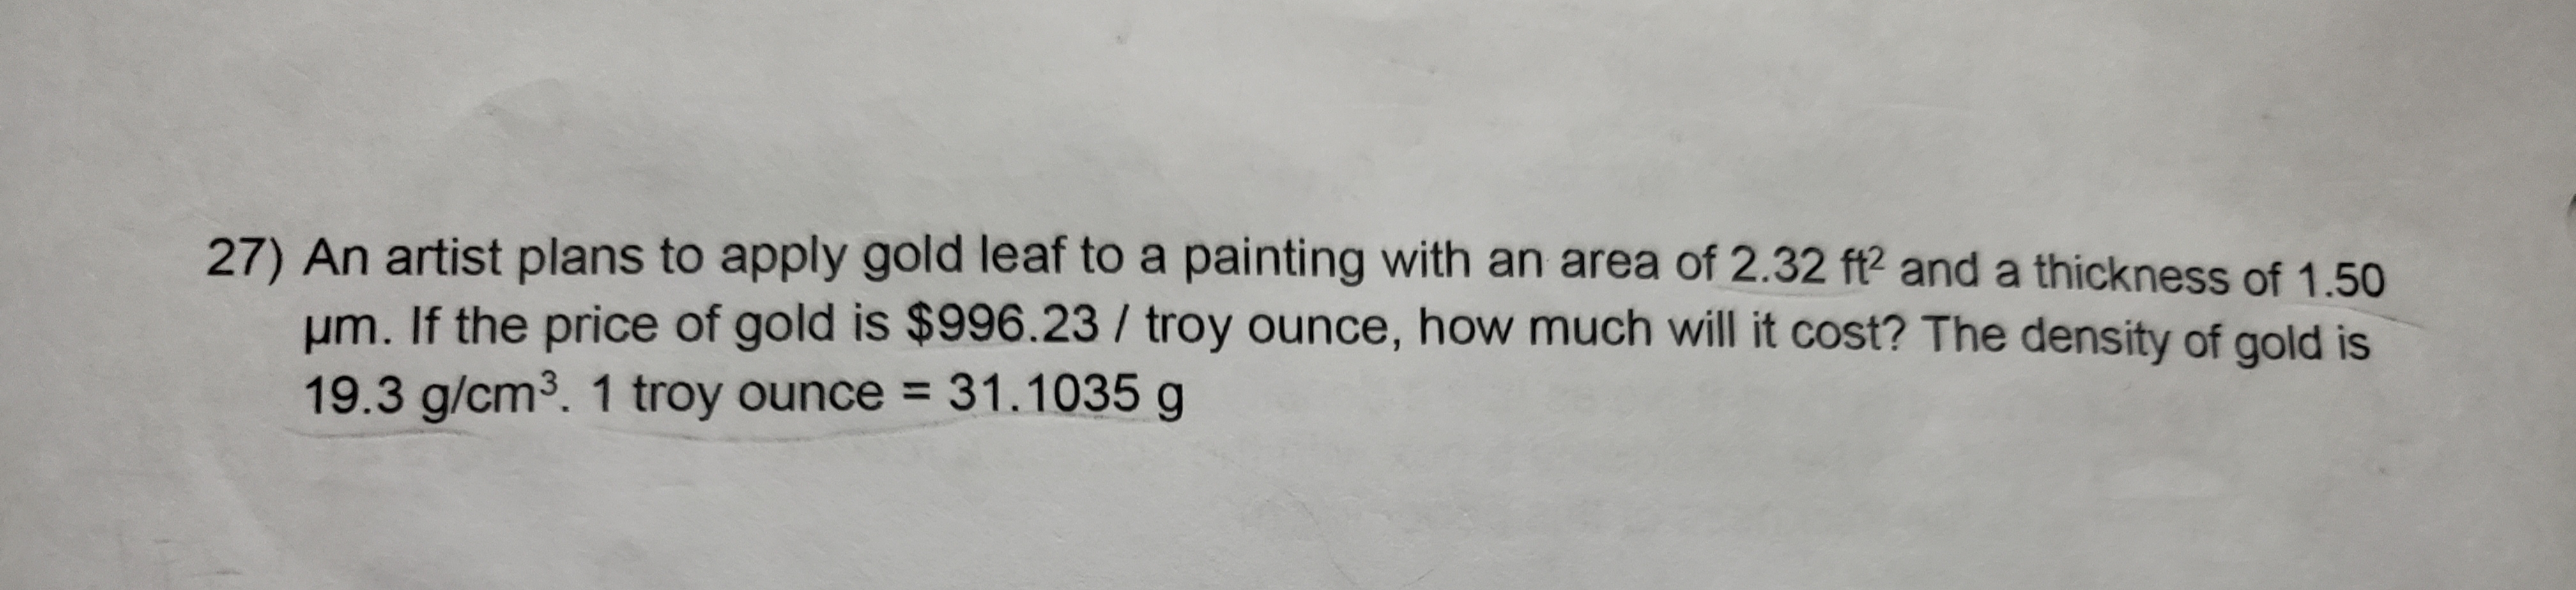 27) An artist plans to apply gold leaf to a painting with an area of 2.32 f? and a thickness of 1.50
Hm. If the price of gold is $996.23/ troy ounce, how much will it cost? The density of gold is
19.3 g/cm3. 1 troy ounce 31.1035 g
